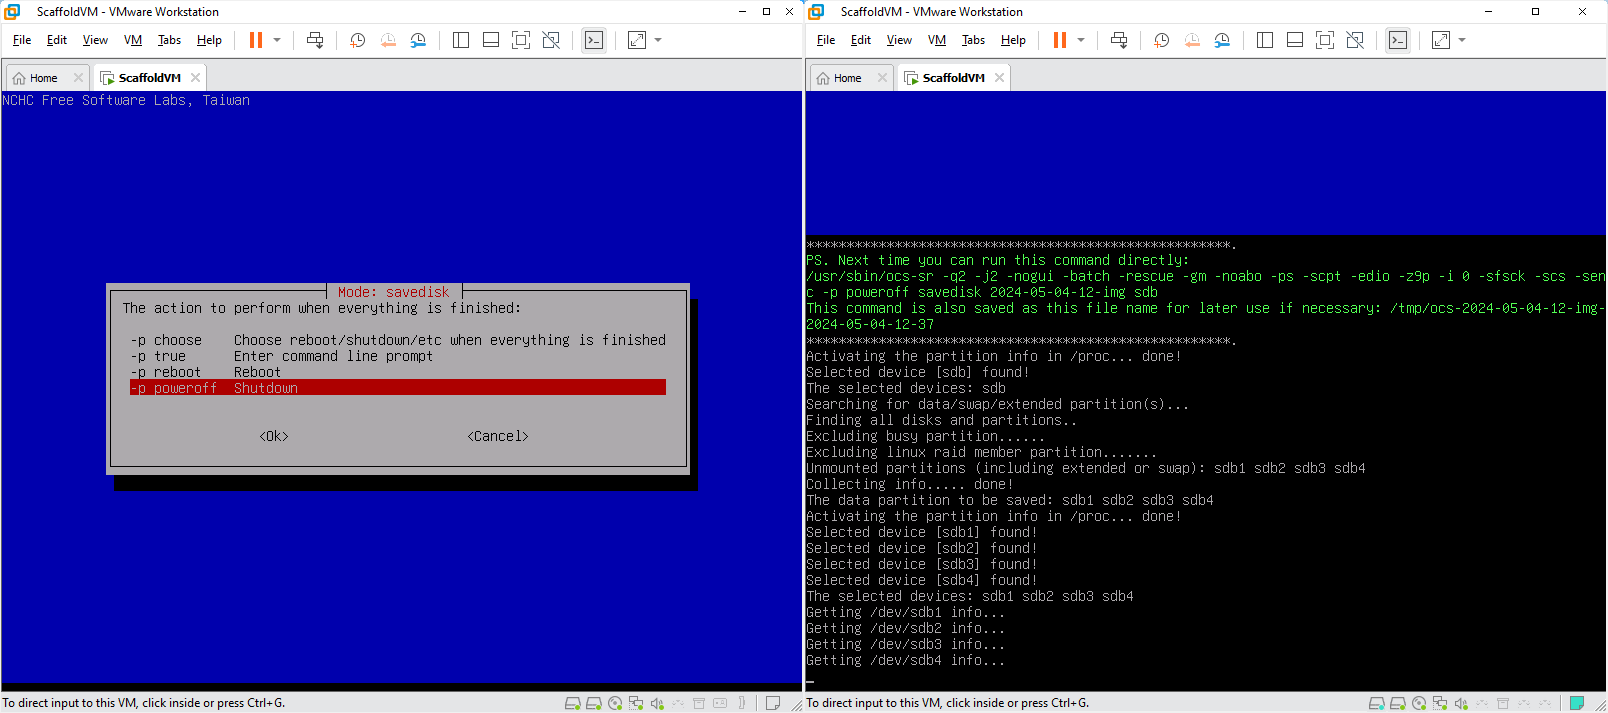 Choose poweroff after operation complete, Savedisk command extract